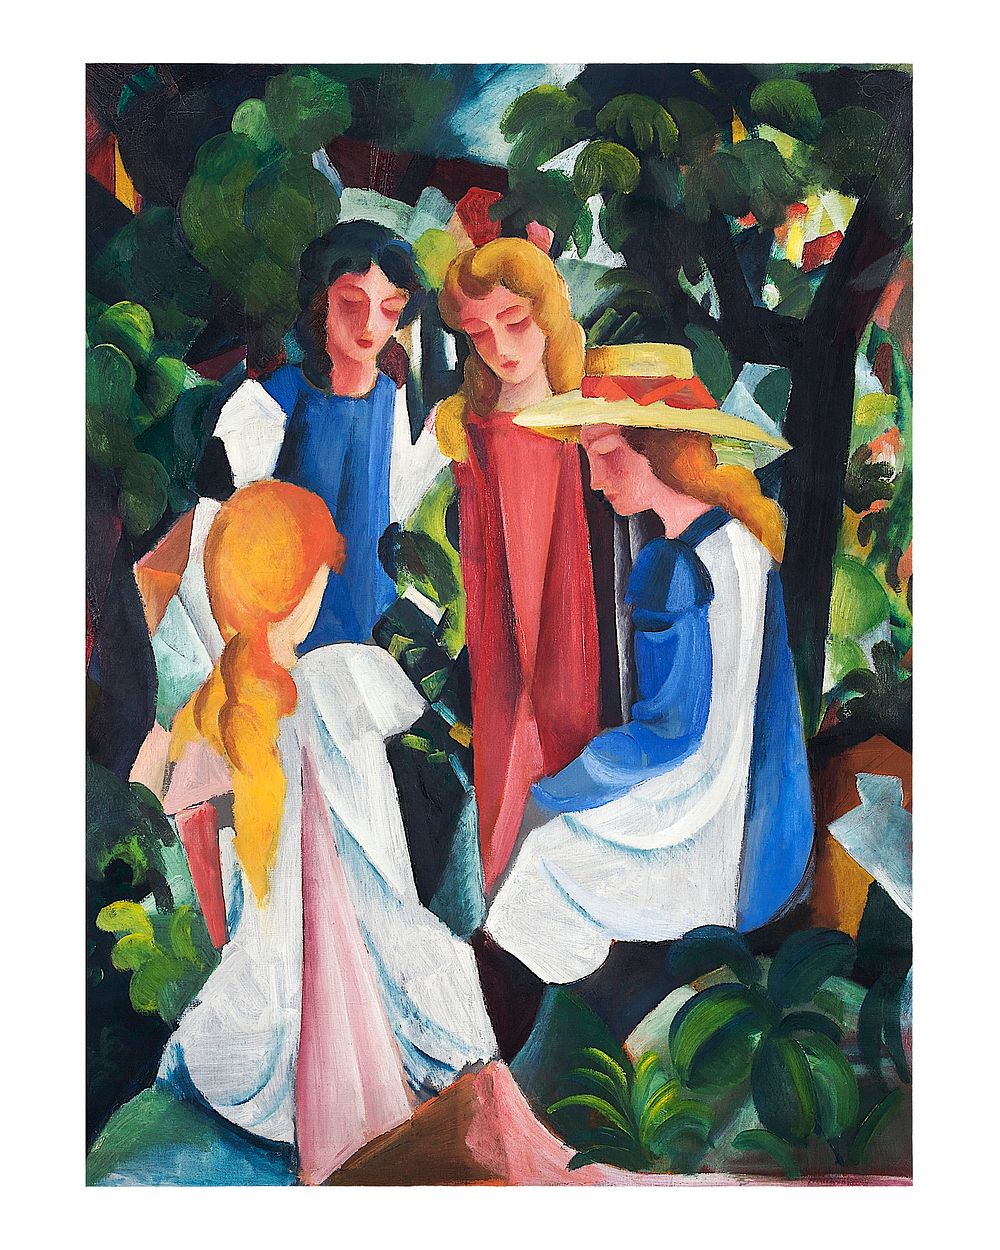 Expressionism art print by August Macke, Four Girls, vintage illustration